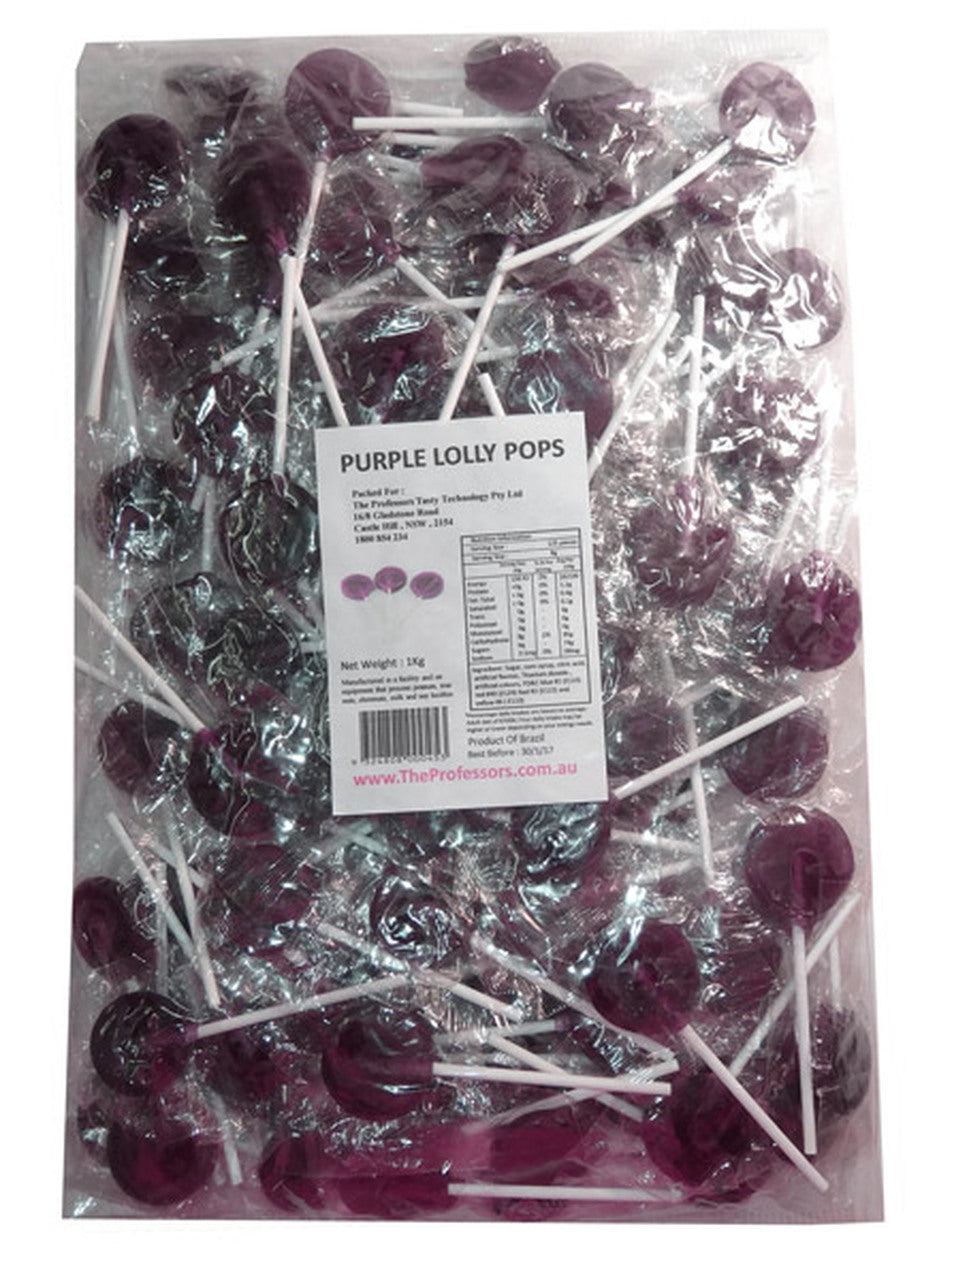 Sweet Treats Purple Lolly pops 8g – Tom's Confectionery Warehouse